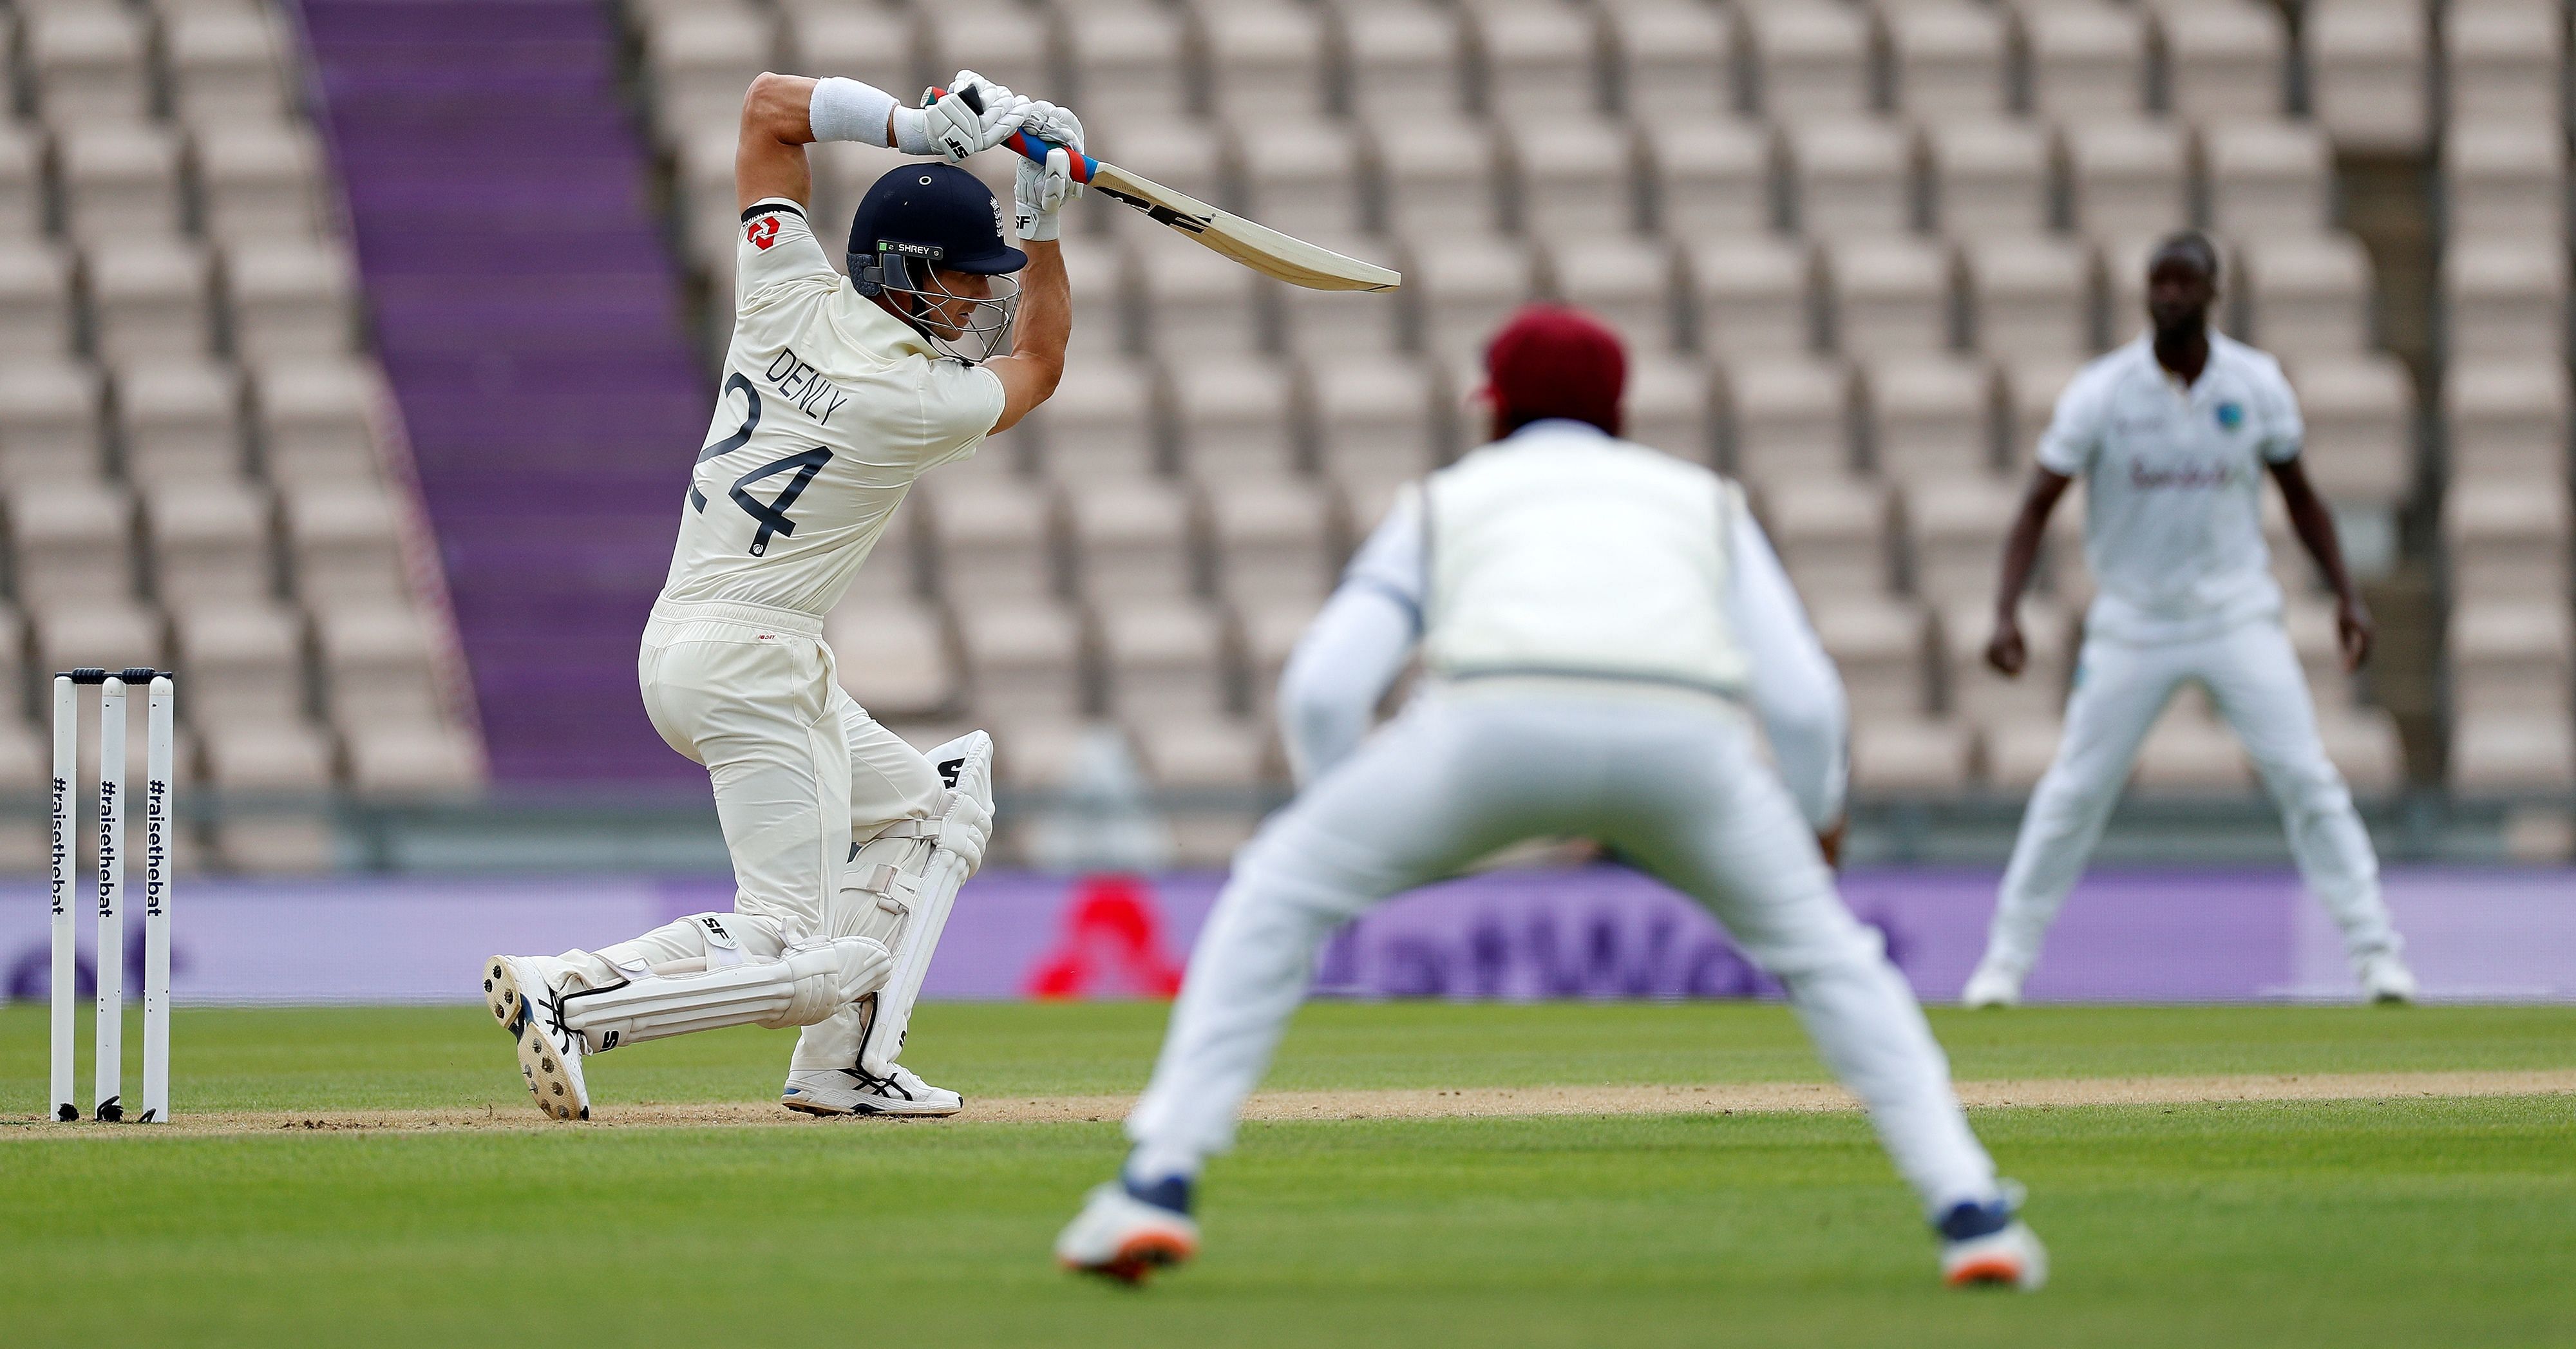 England's Joe Denly (L) plays a shot on the first day of the first Test cricket match between England and the West Indies at the Ageas Bowl in Southampton, southwest England. Credit: AFP